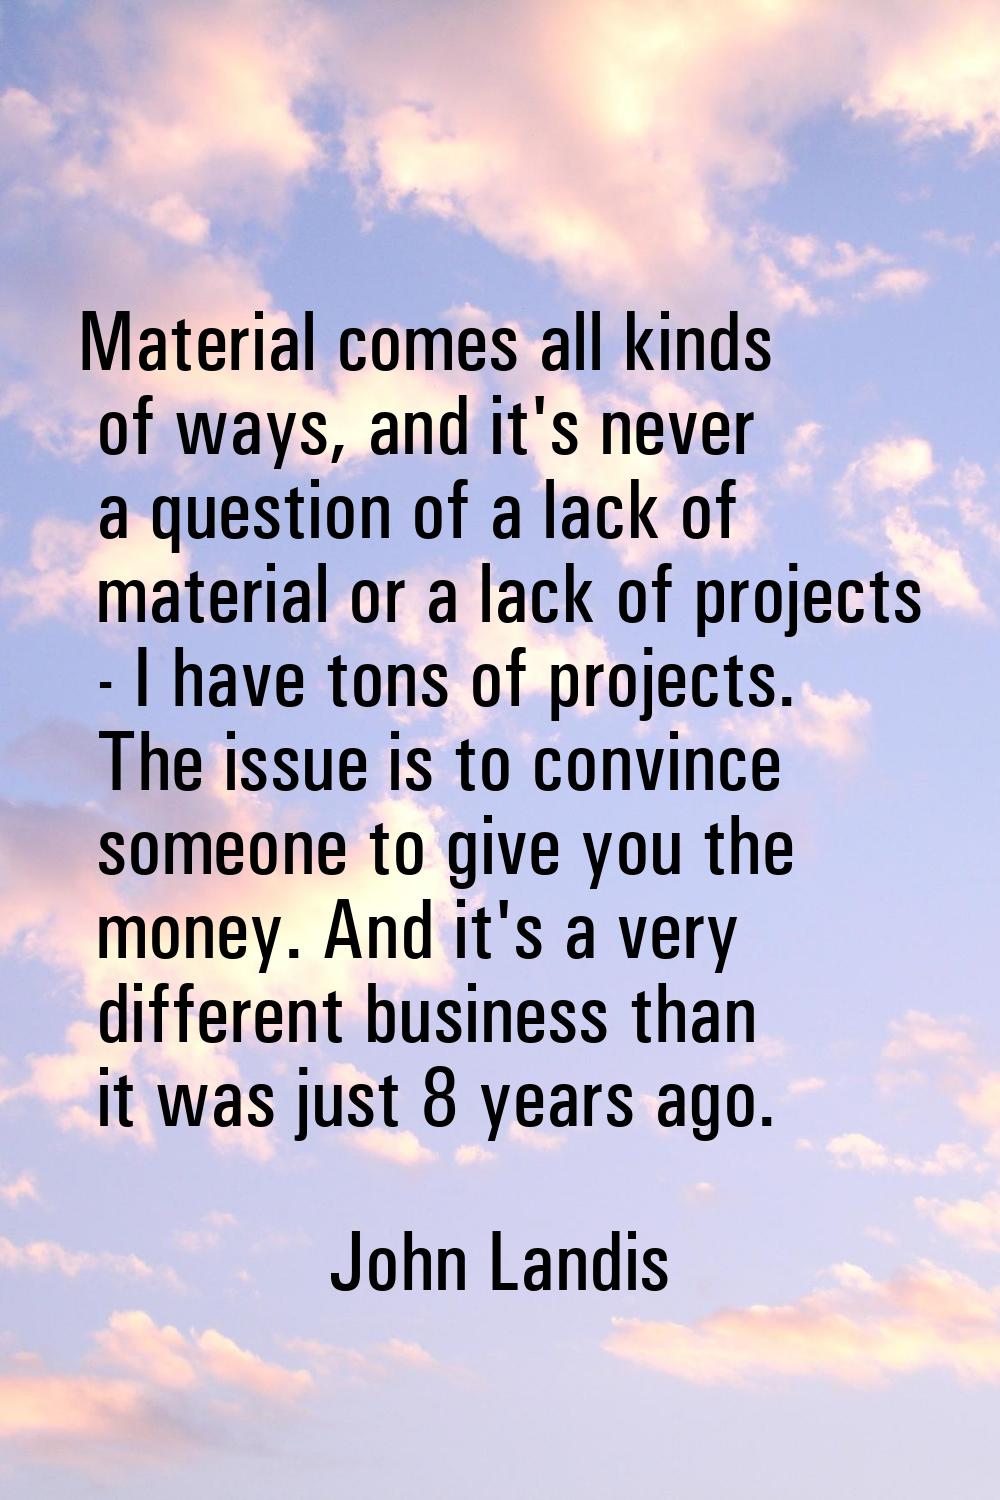 Material comes all kinds of ways, and it's never a question of a lack of material or a lack of proj